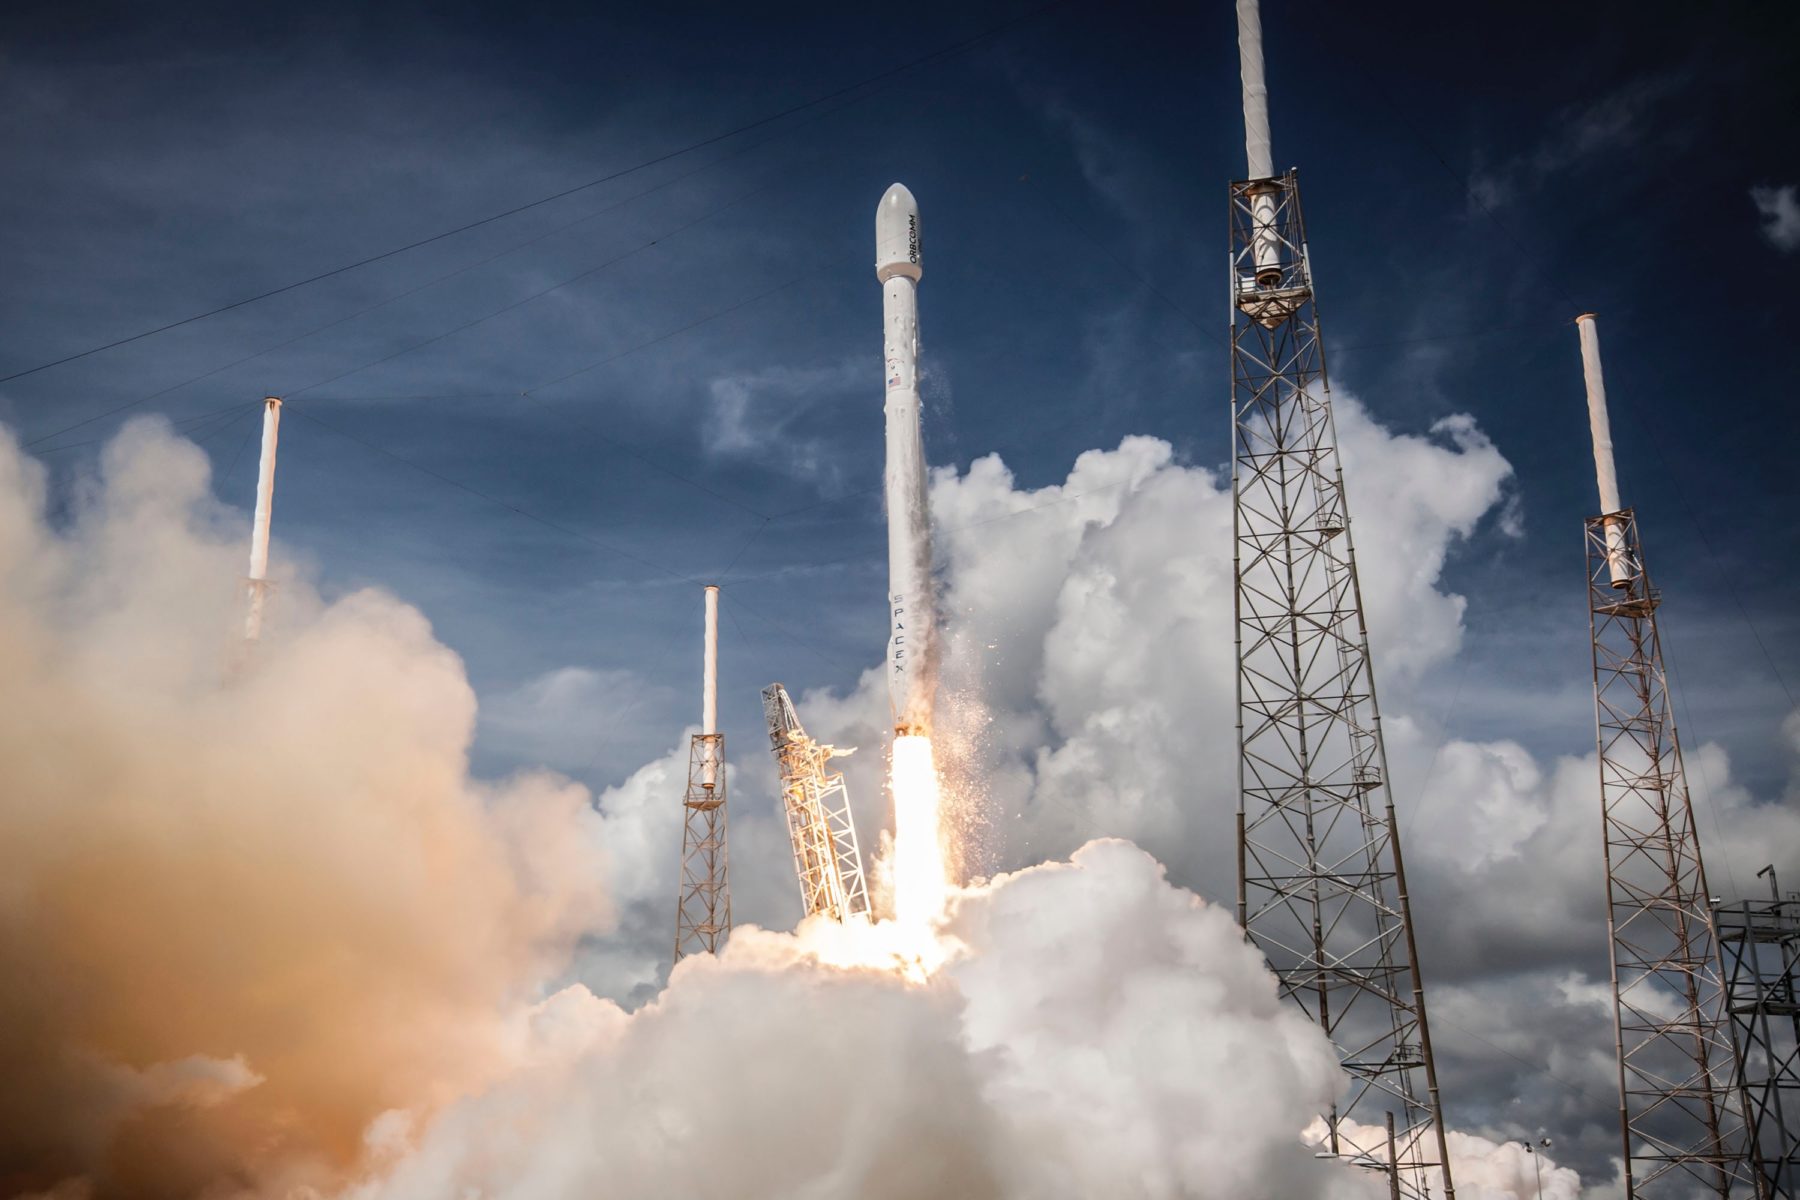 An image from the SpaceX launch at Cape Canaveral Air Force Station, United States.